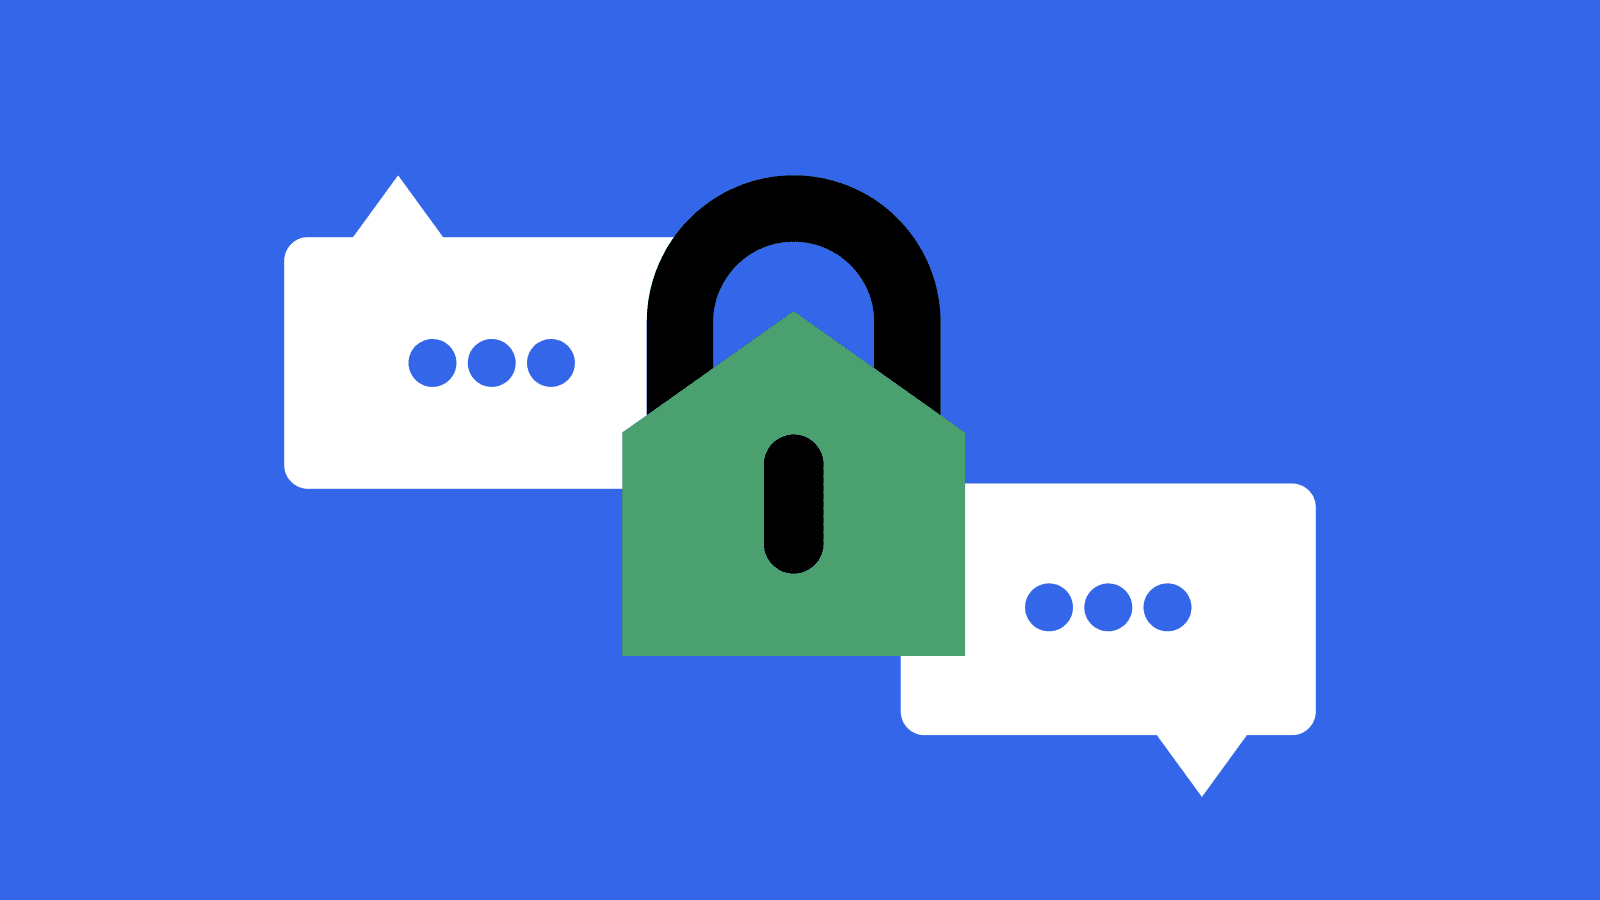 Are you worried about digital privacy? Learn how notes online protect your messages.